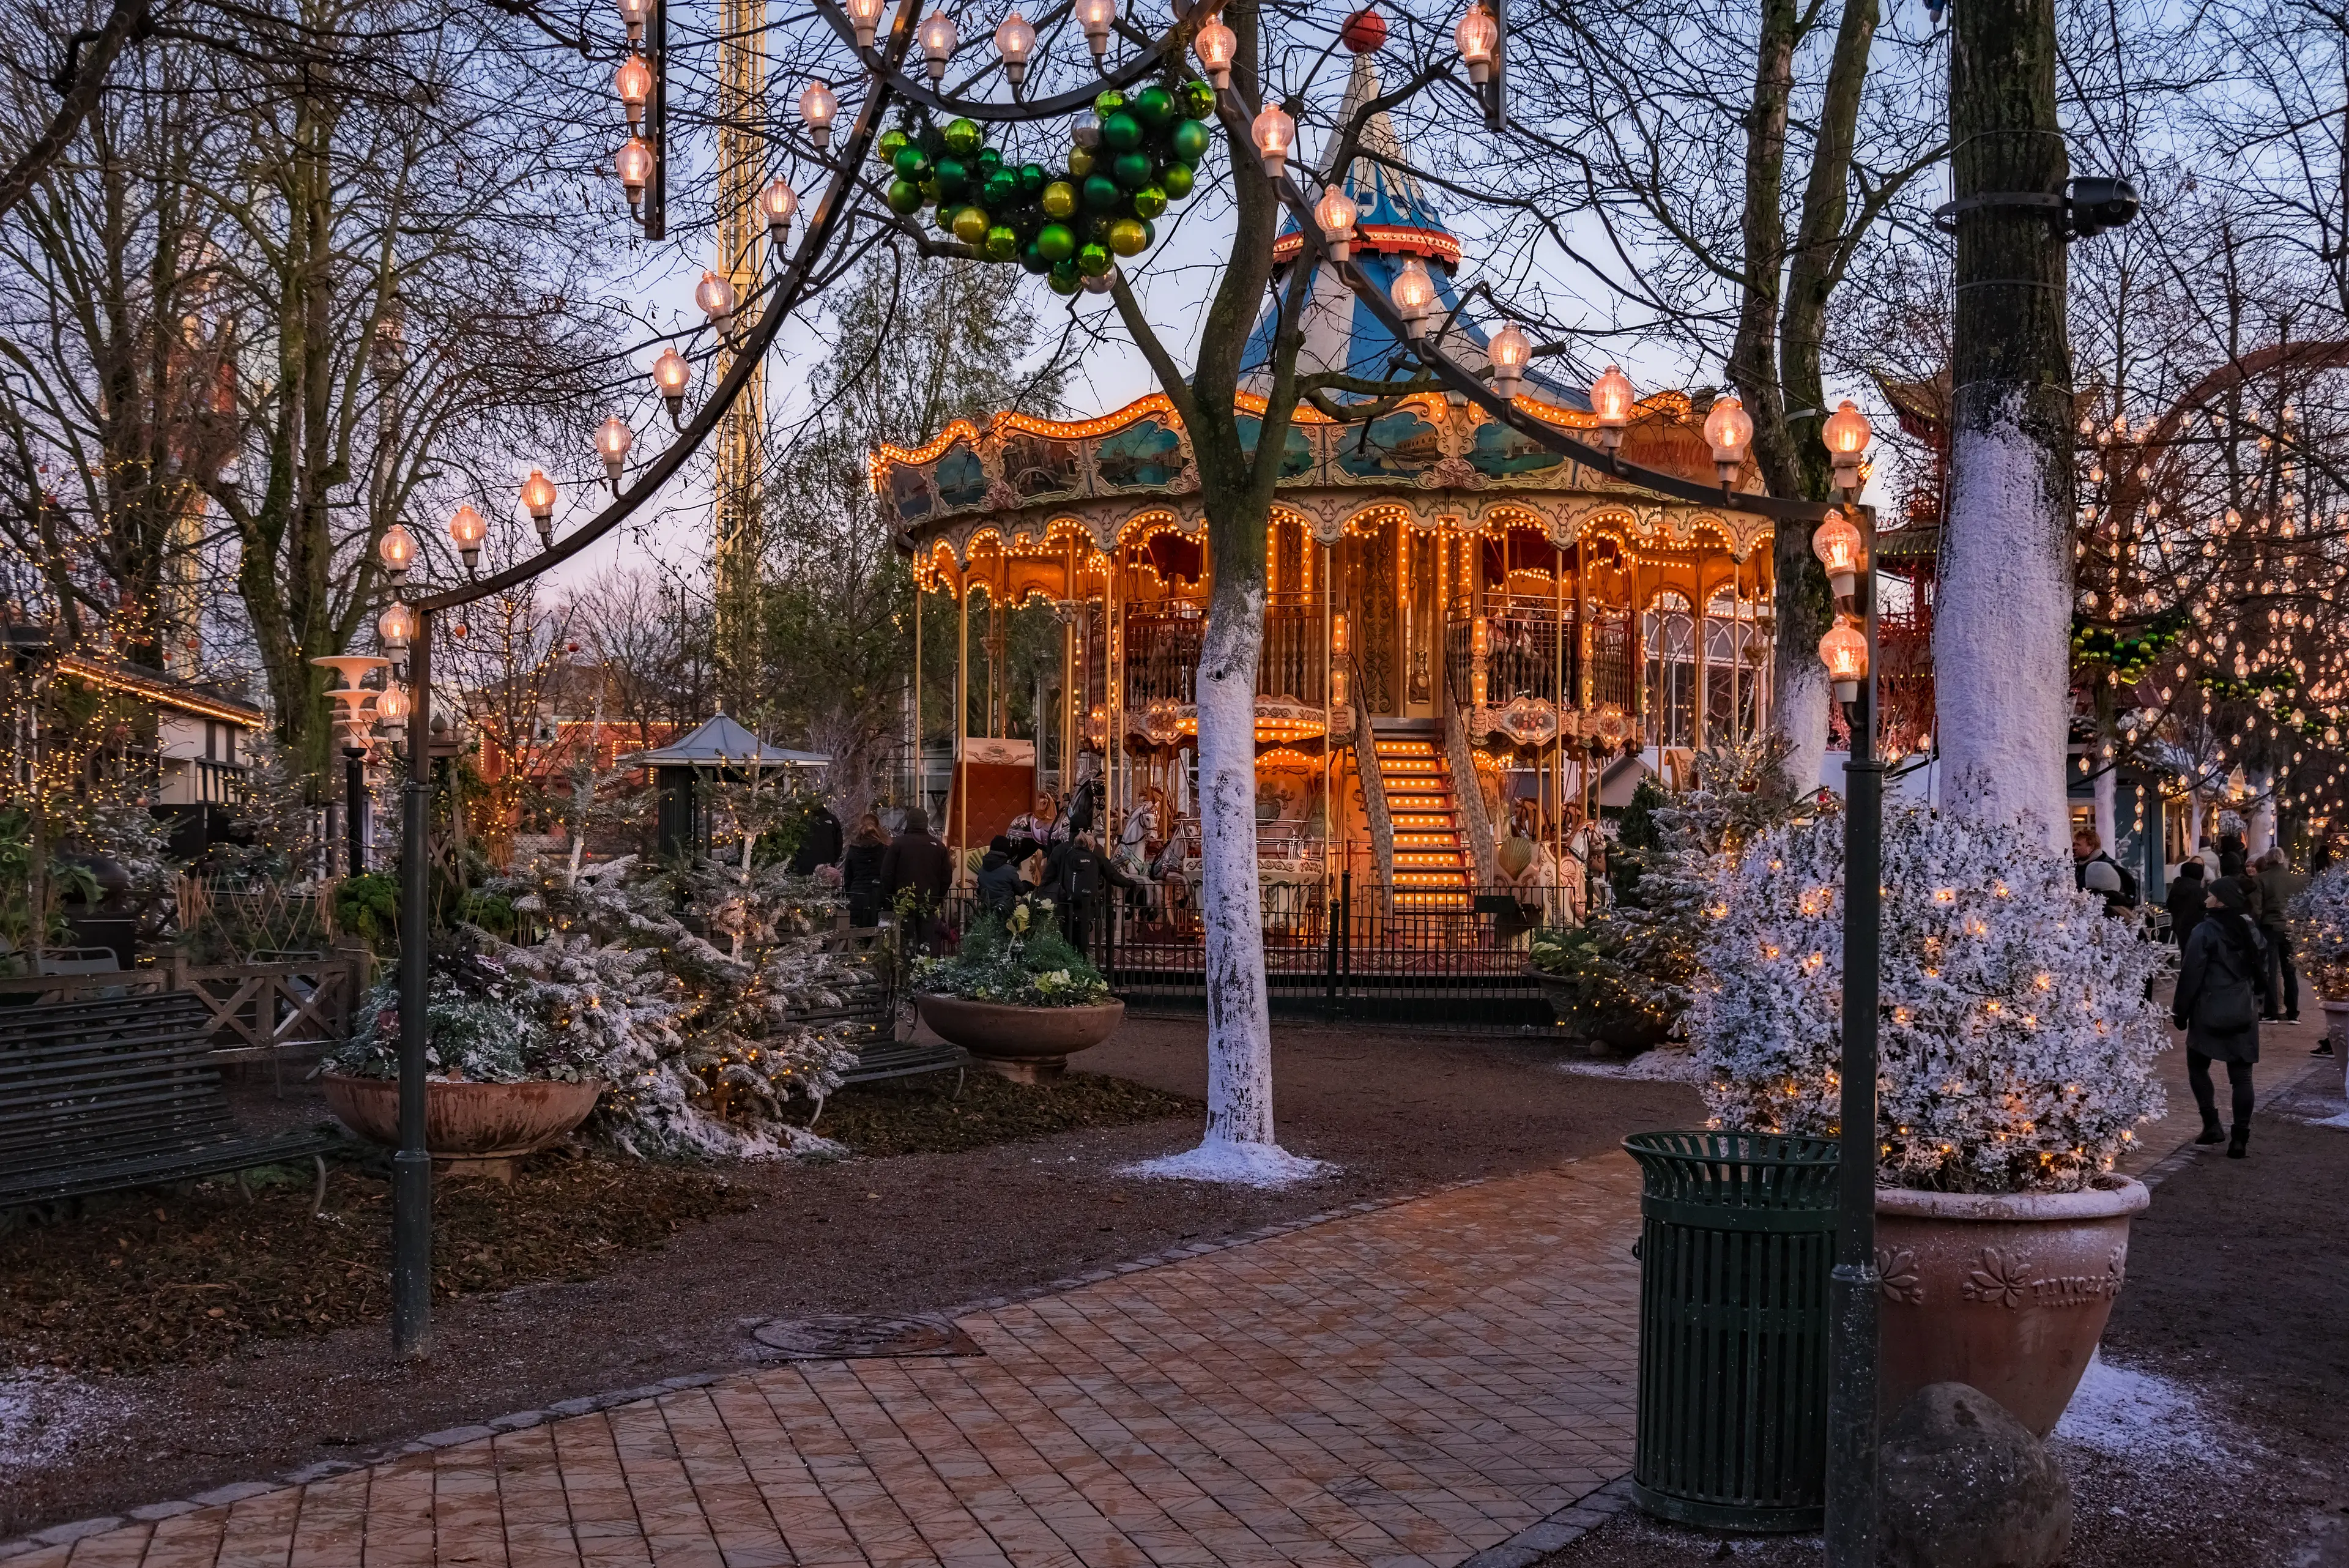 Christmas Carousel in the Park